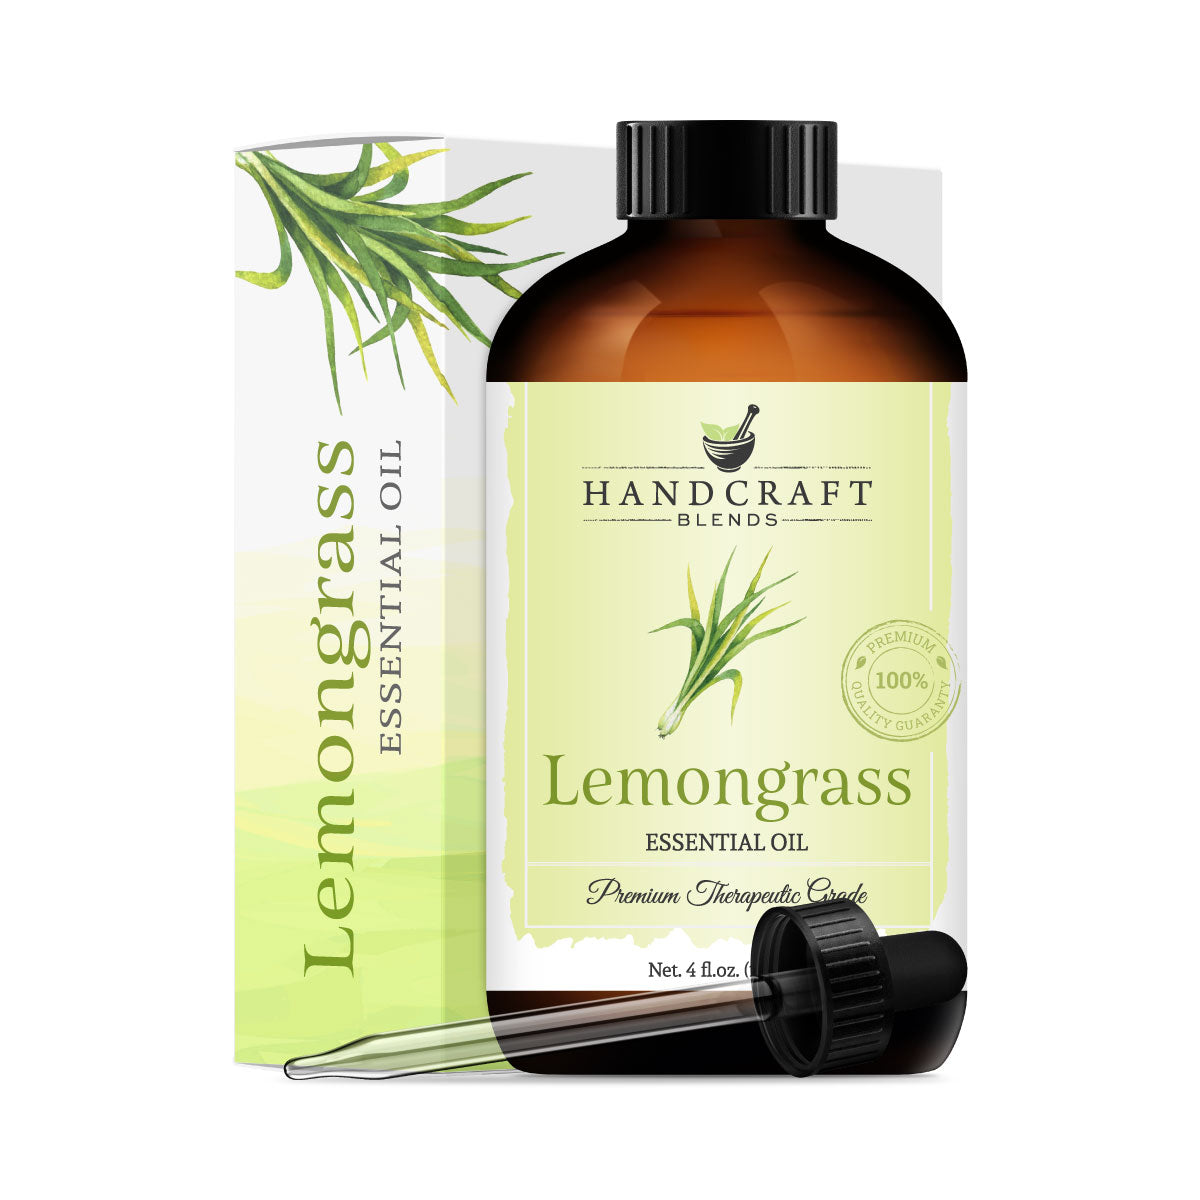 Buy Pure Lemongrass Essential Oil, Best Uses and Benefits